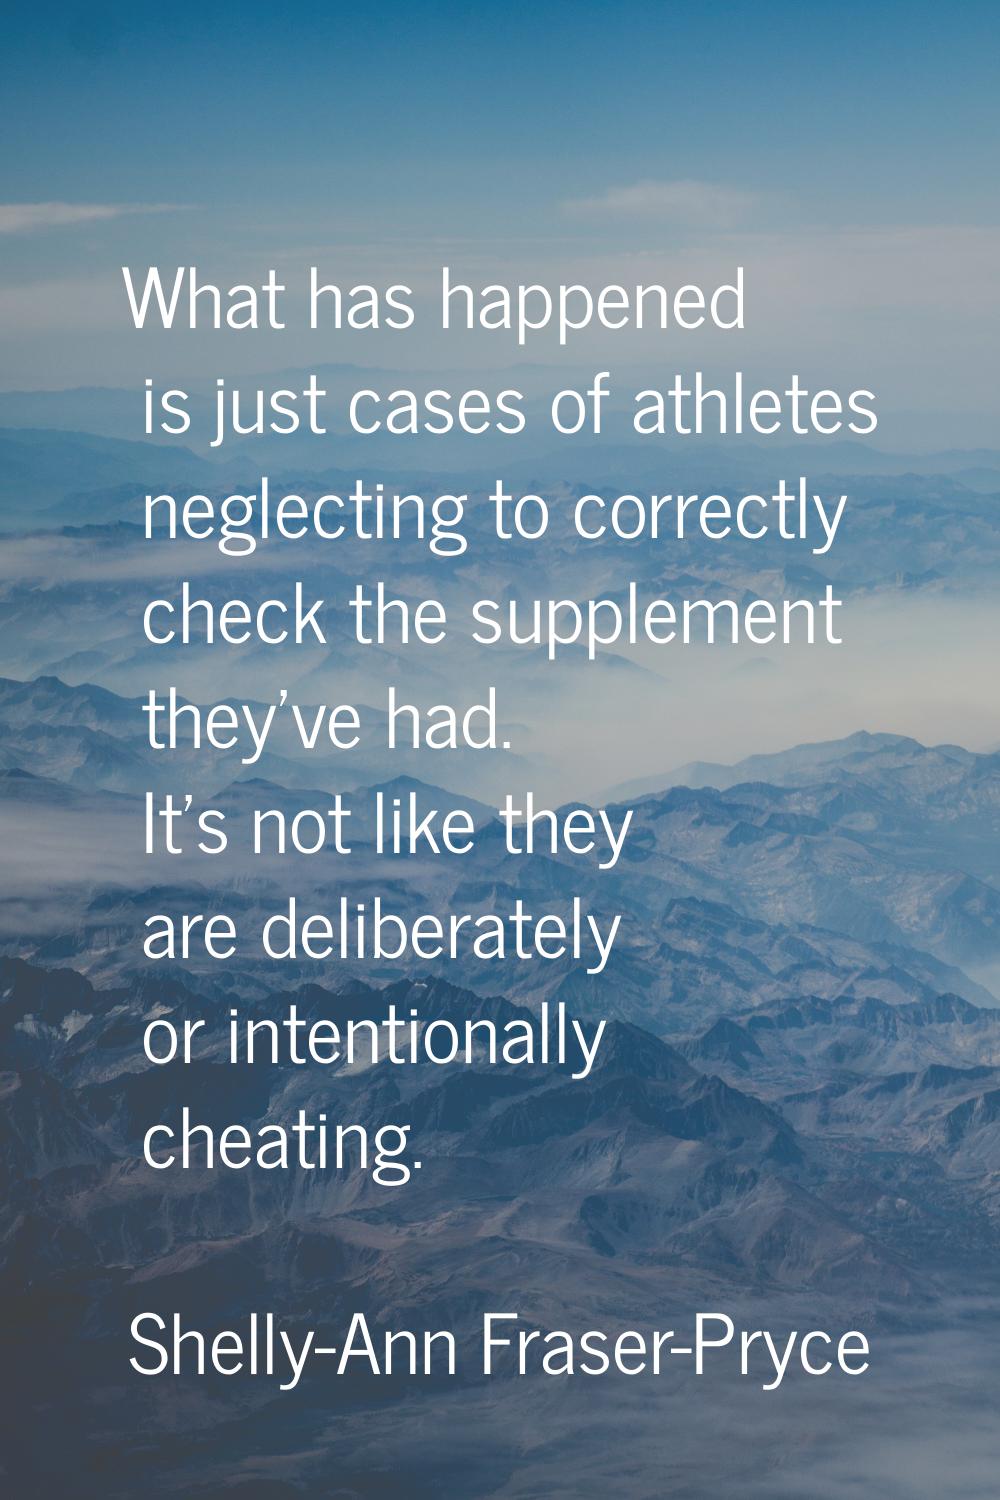 What has happened is just cases of athletes neglecting to correctly check the supplement they've ha